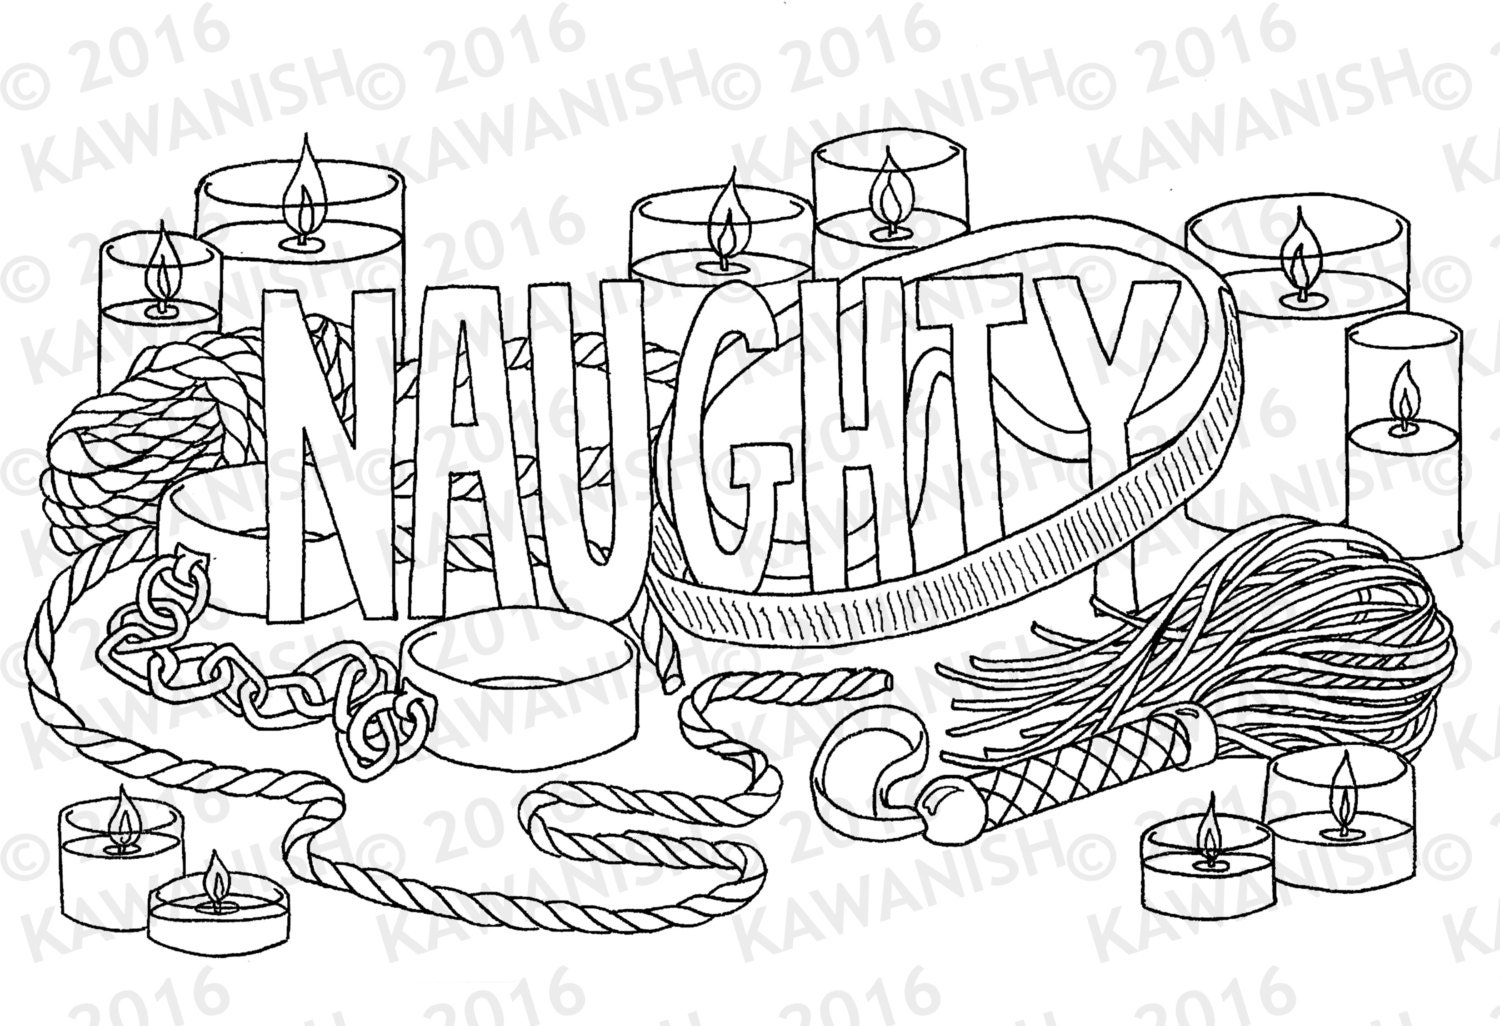 Download naughty kinky BDSM adult coloring page wall art